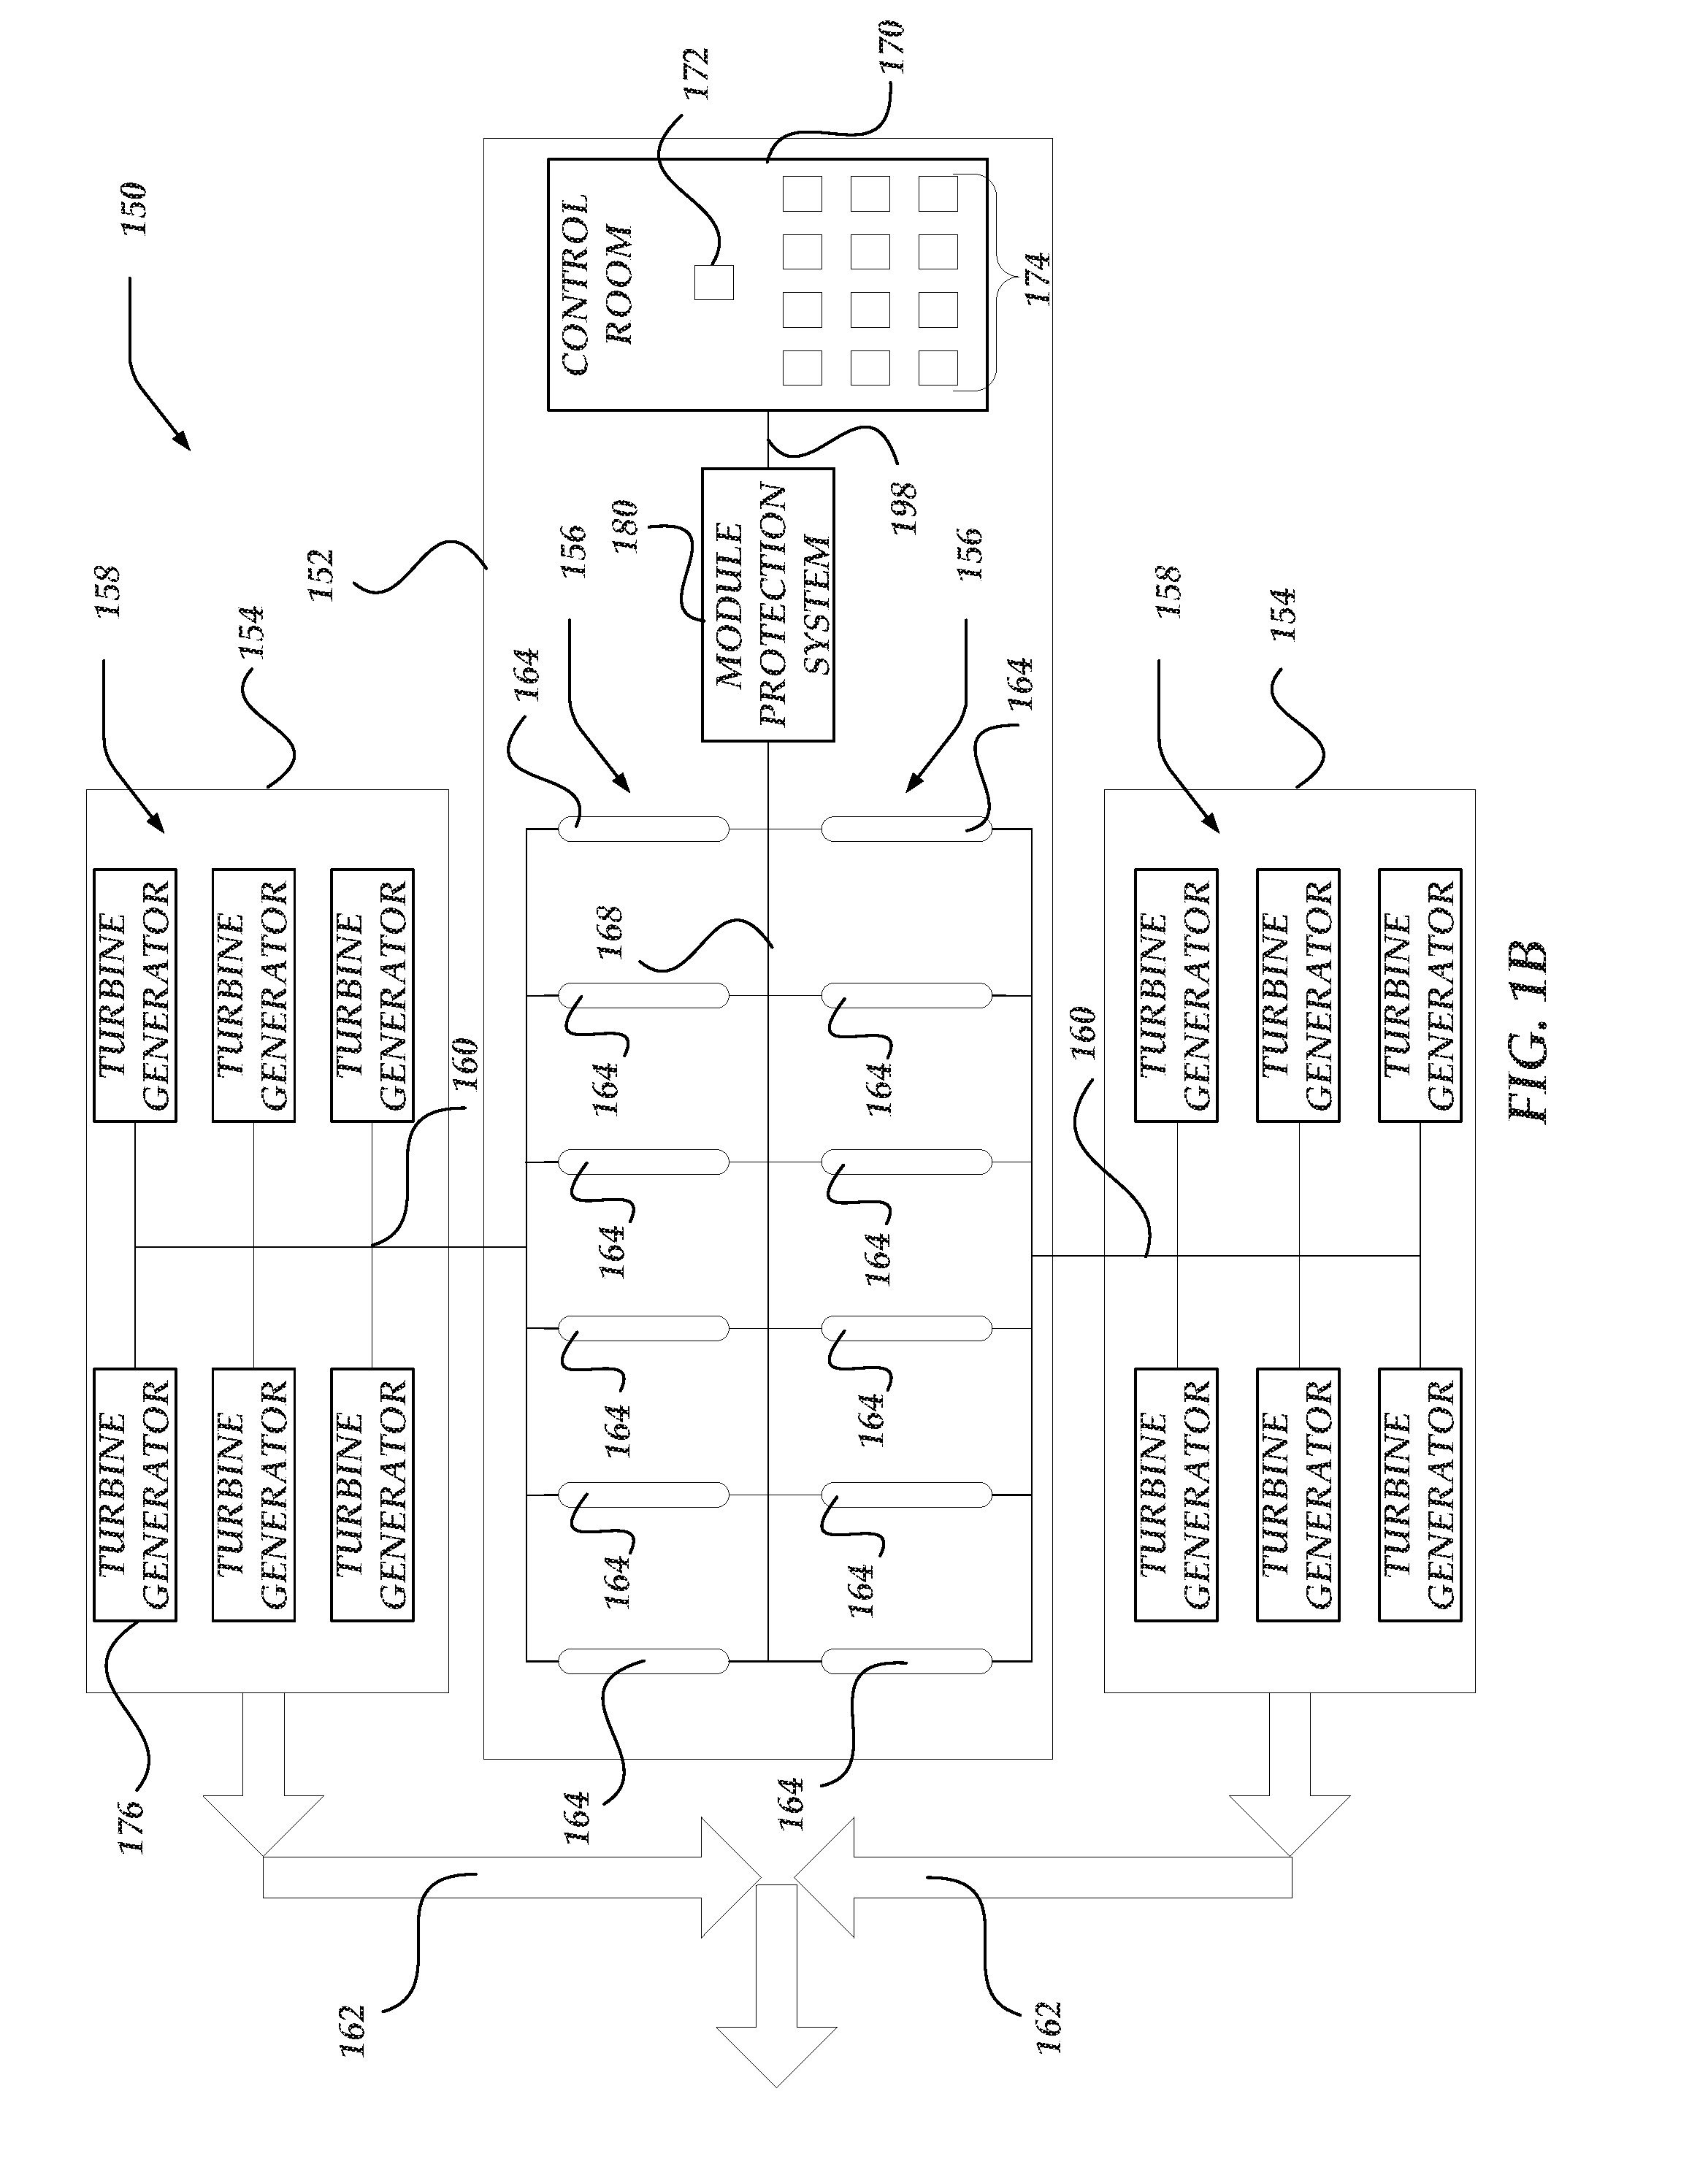 Systems and methods for monitoring a power-generation module assembly after a power-generation module shutdown event